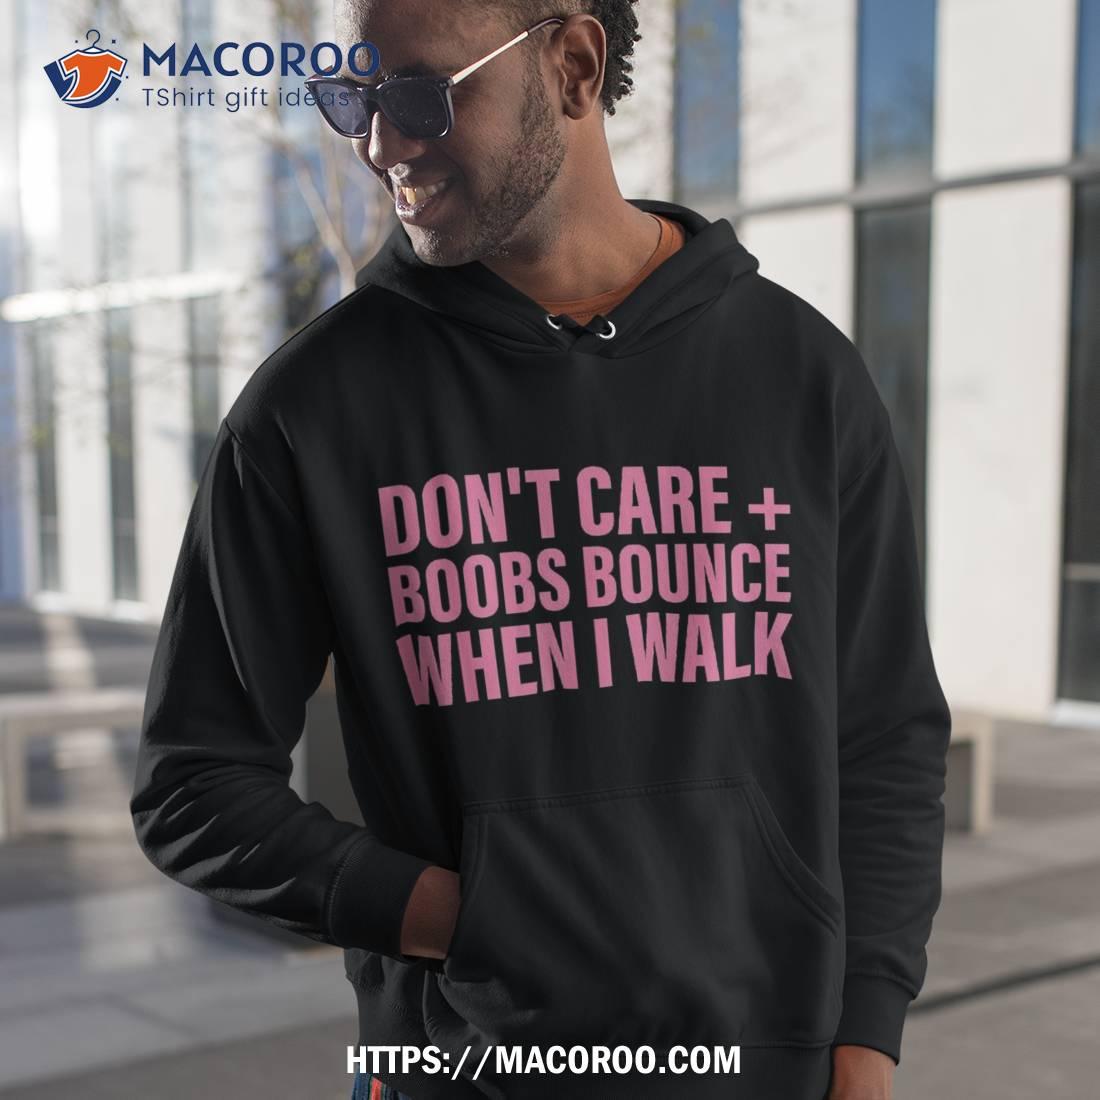 https://images.macoroo.com/wp-content/uploads/2023/07/don-t-care-boobs-bounce-when-i-walk-quote-shirt-hoodie-1.jpg